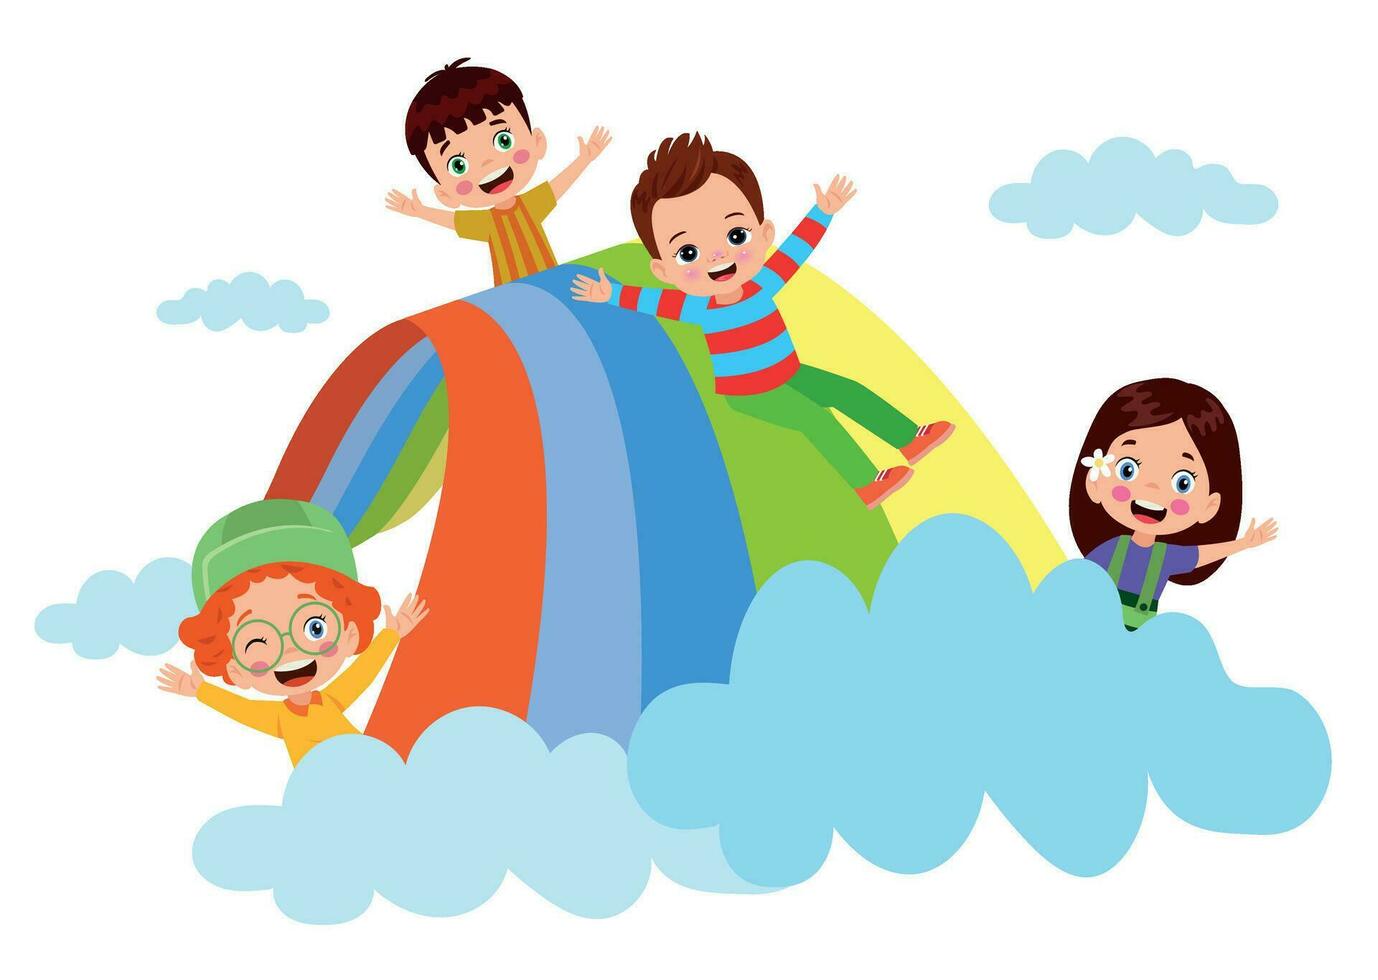 Children playing on a rainbow. Vector illustration in flat cartoon style.